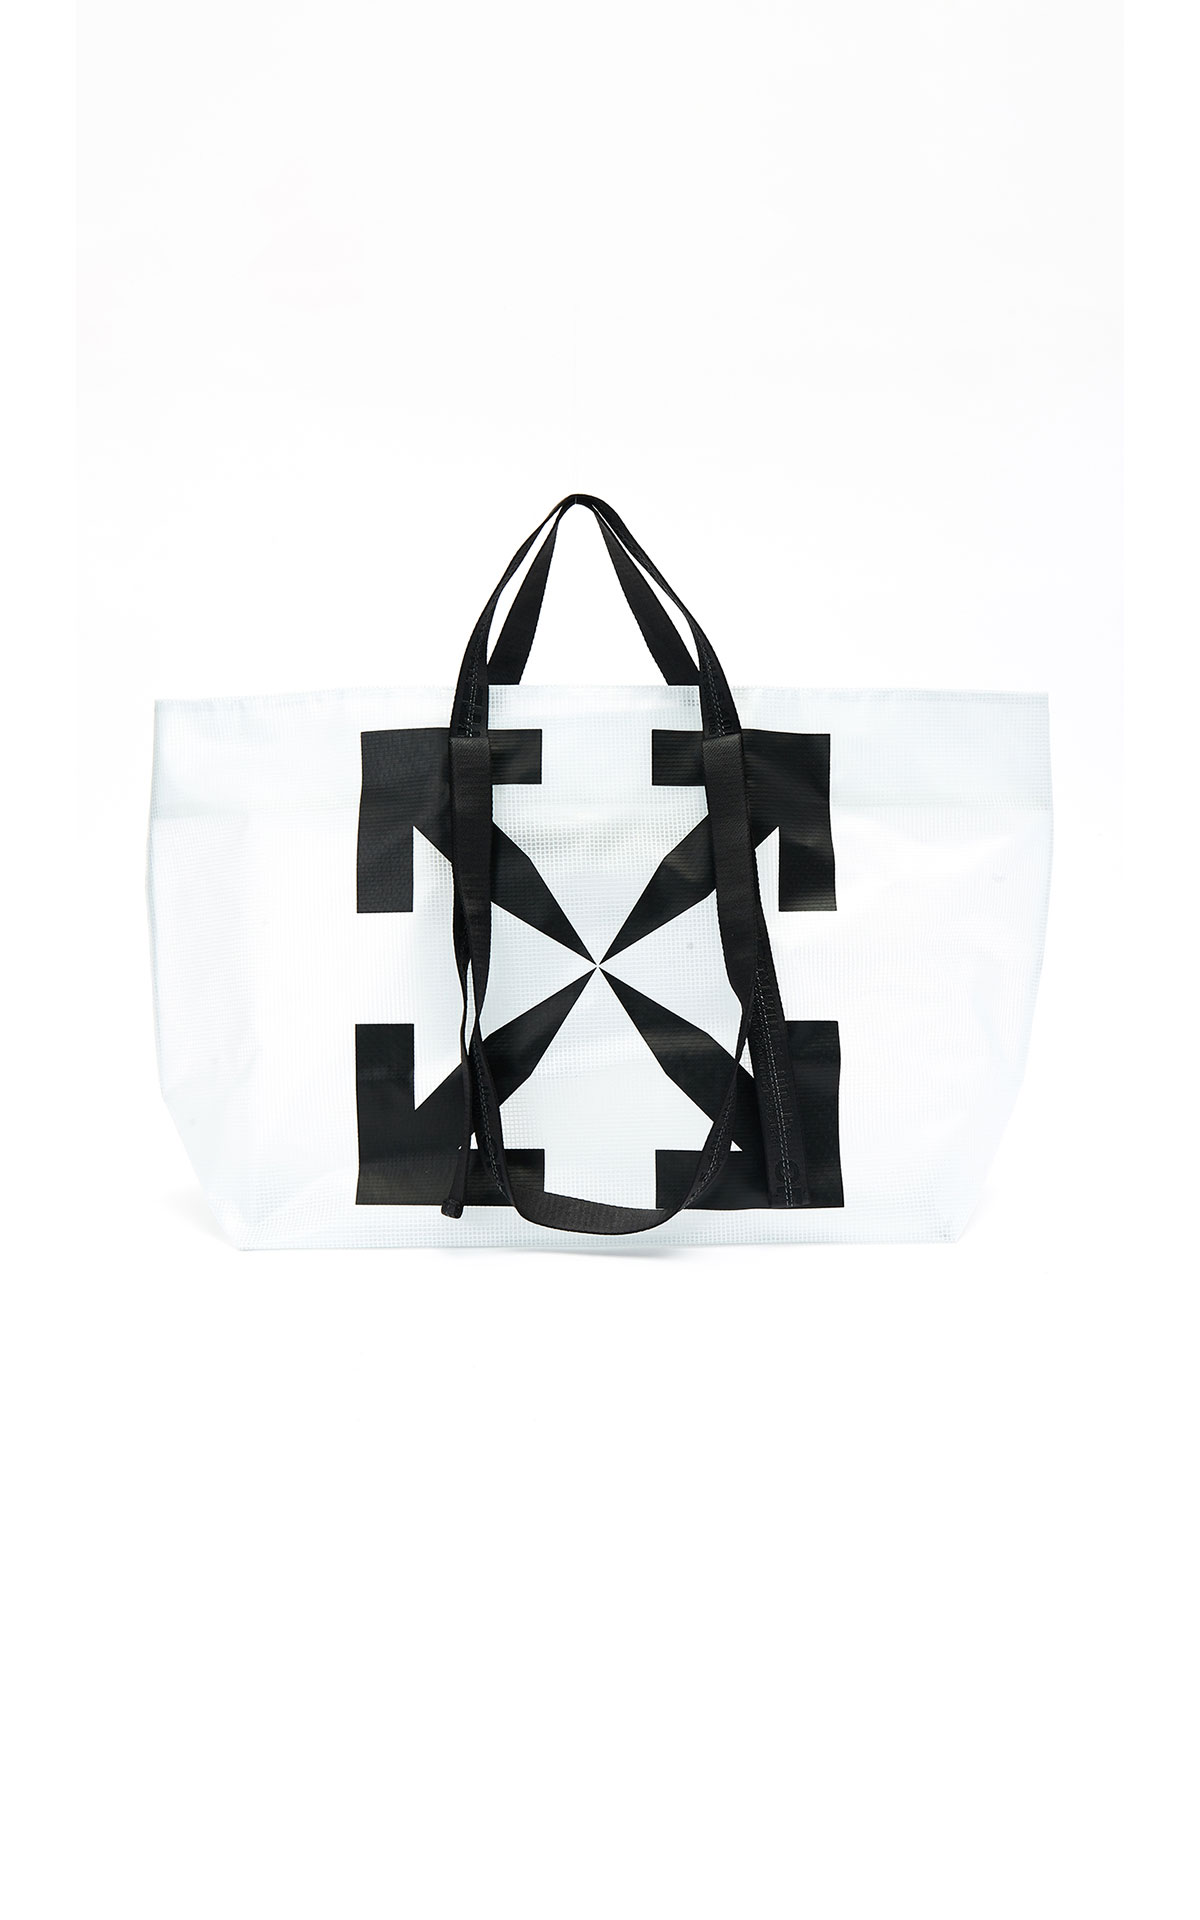 Off-White Man commercial tote transparent black from Bicester Village